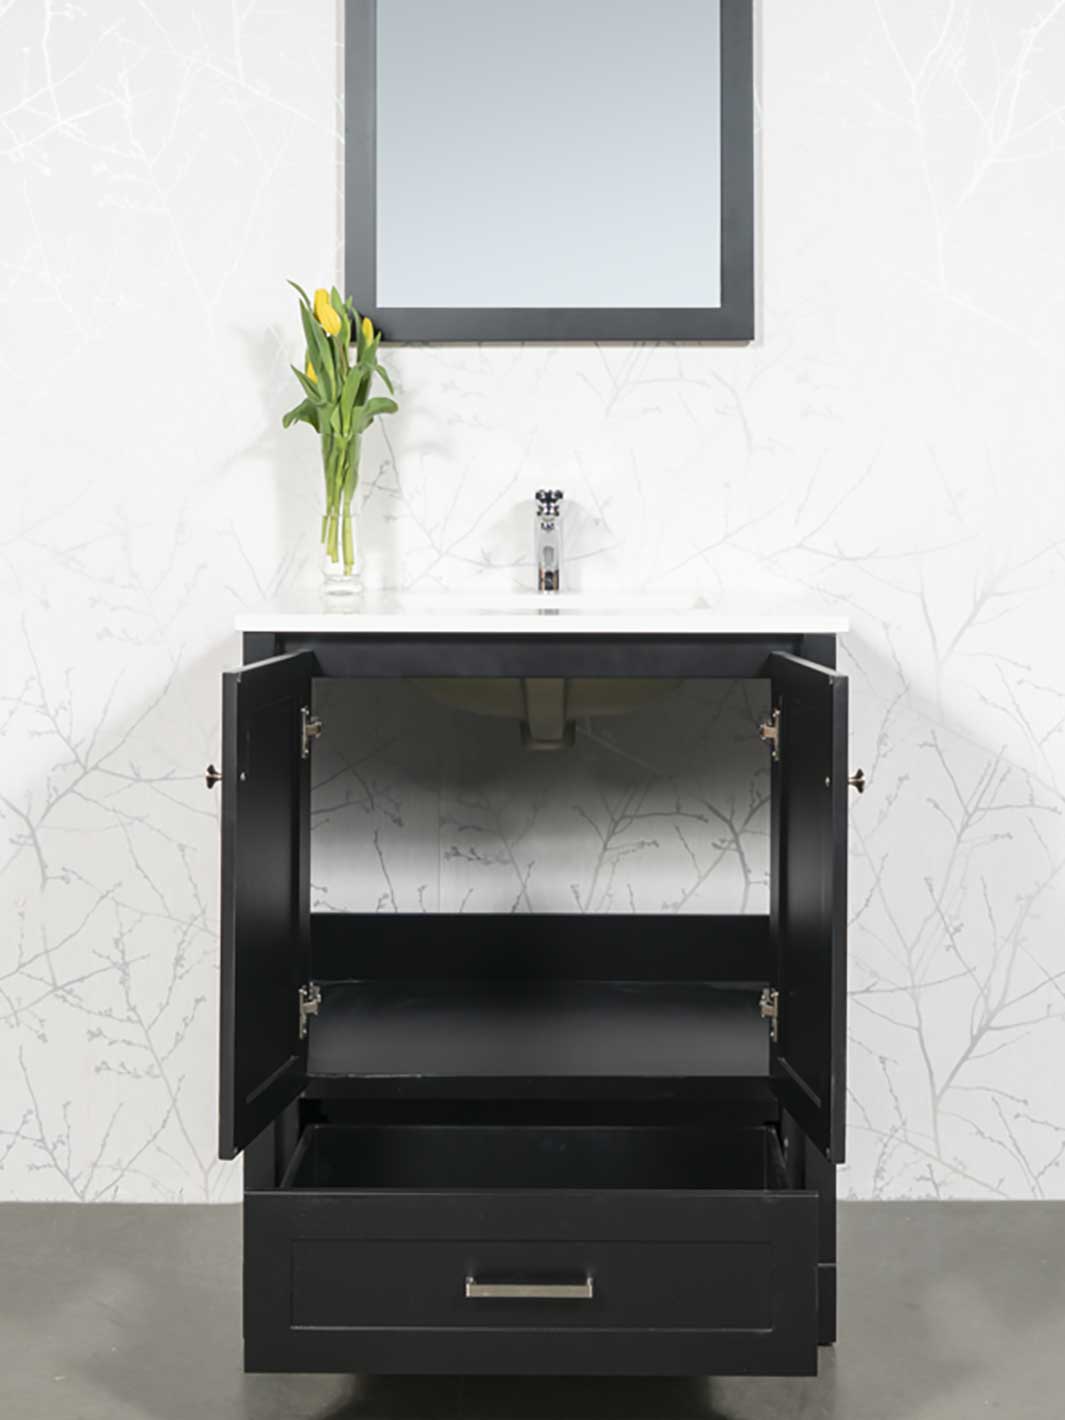 Cupboard and drawer of black vanity with quartz counter and chrome faucet